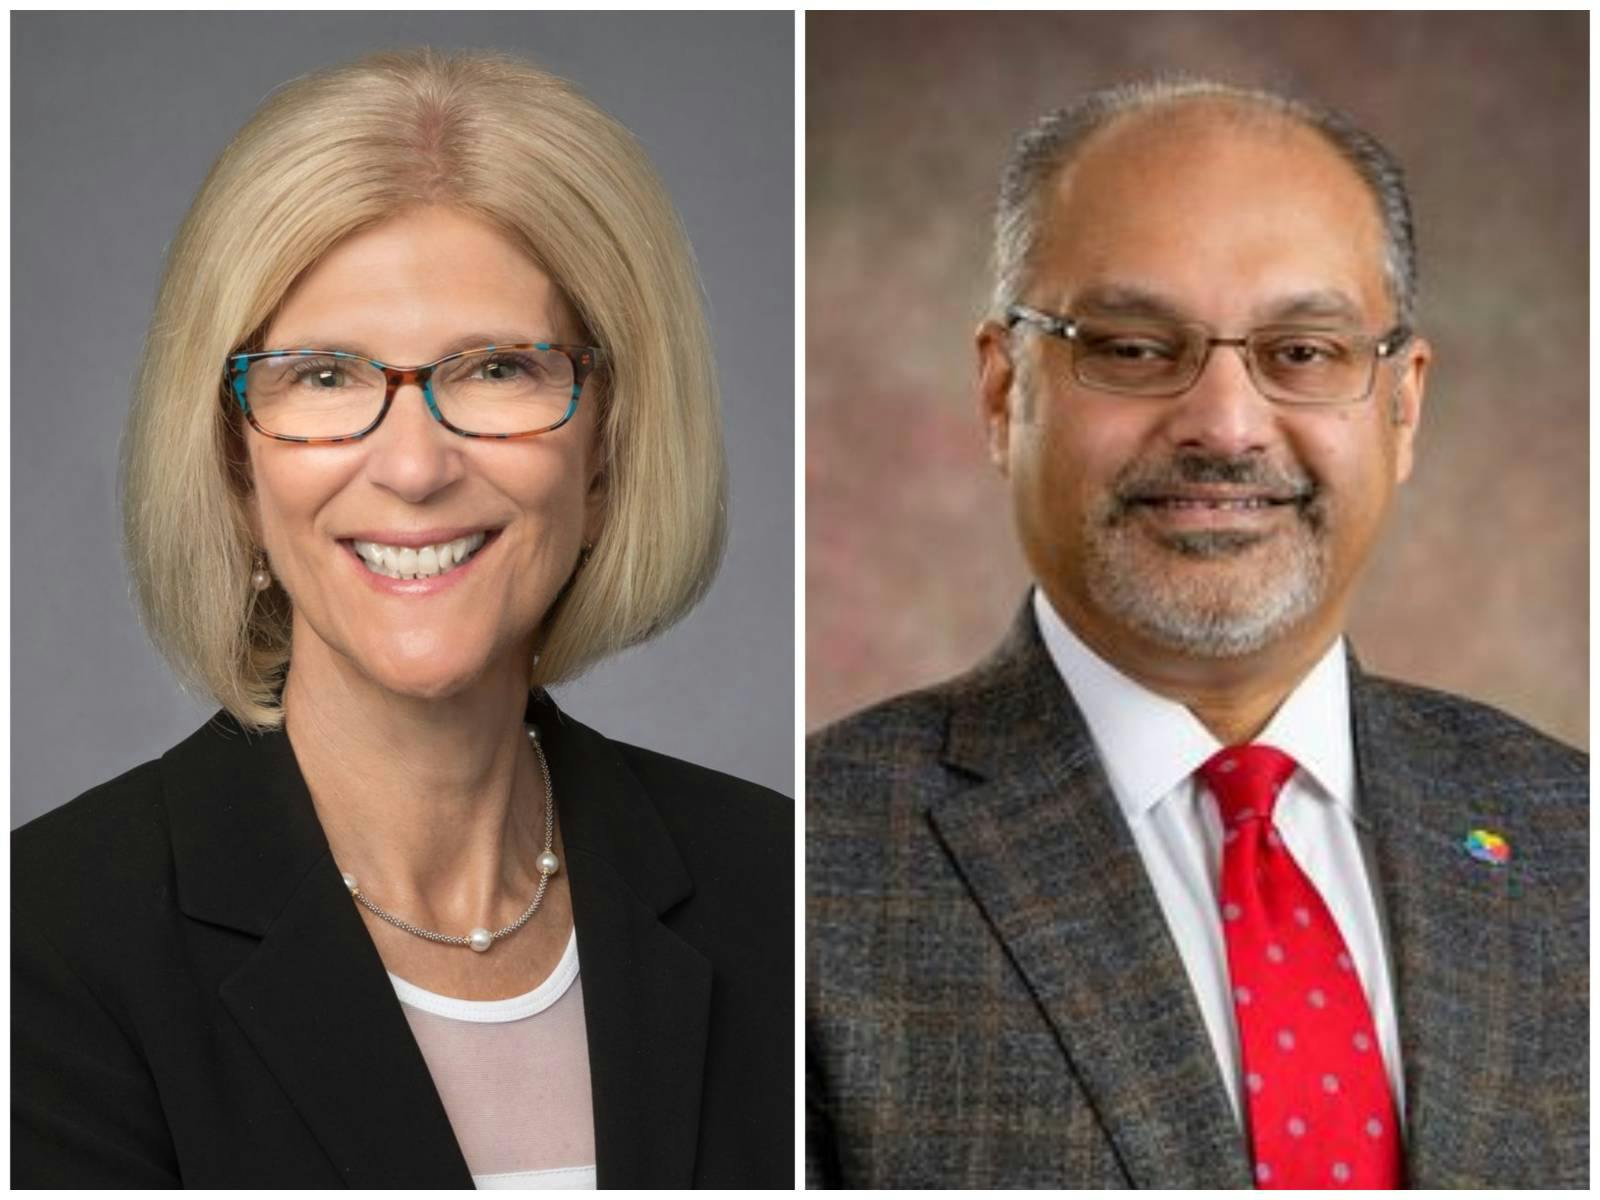 Cathy Jacobson, president and CEO of Froedtert Health, and Imran A. Andrabi, president and CEO of ThedaCare, say the merged system will expand care in Wisconsin.